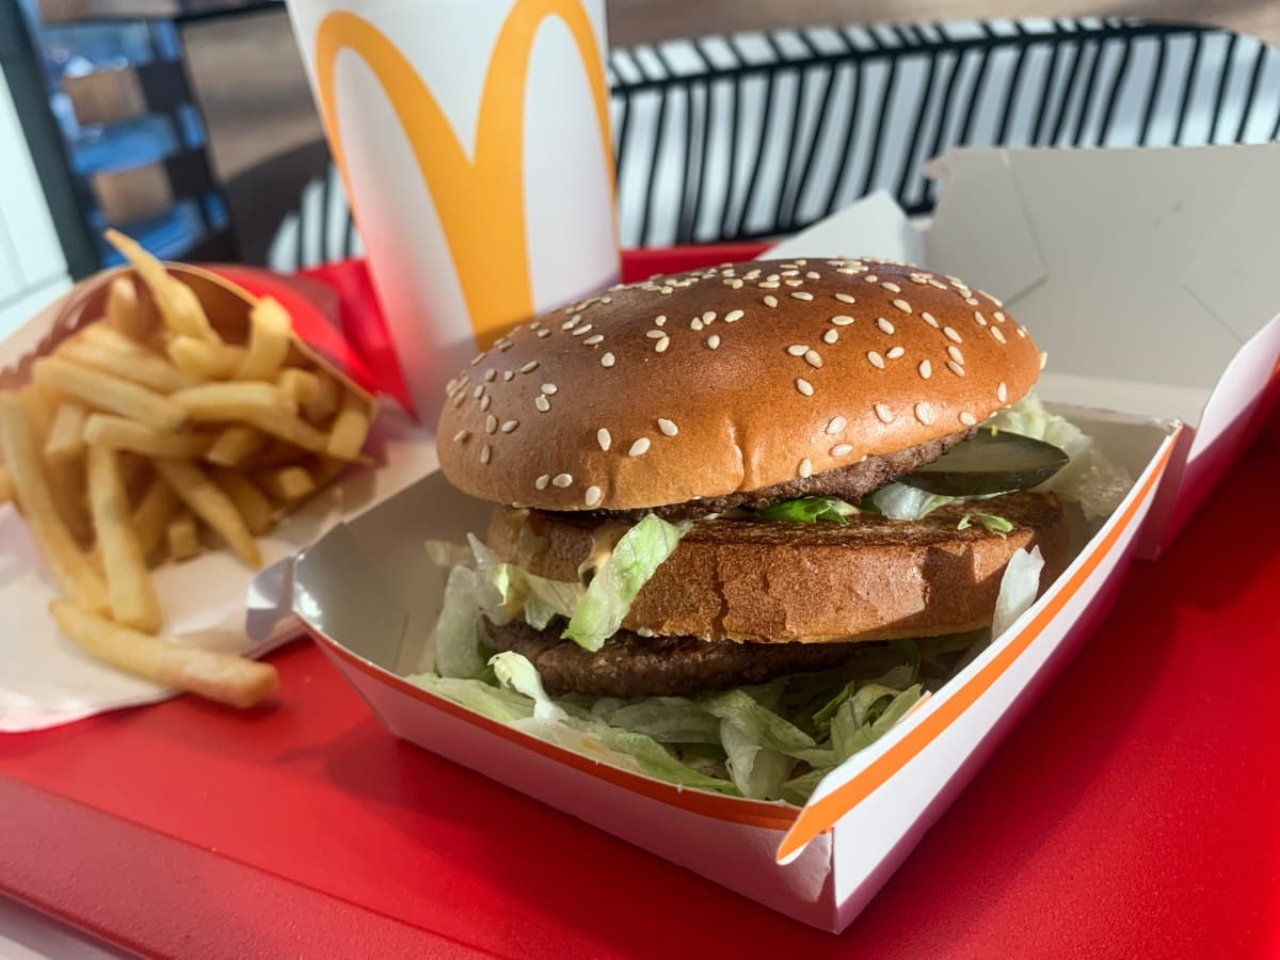 Although the menu remains unchanged, McDonald's is gearing up for substantial alterations to their primary menu items—burgers.